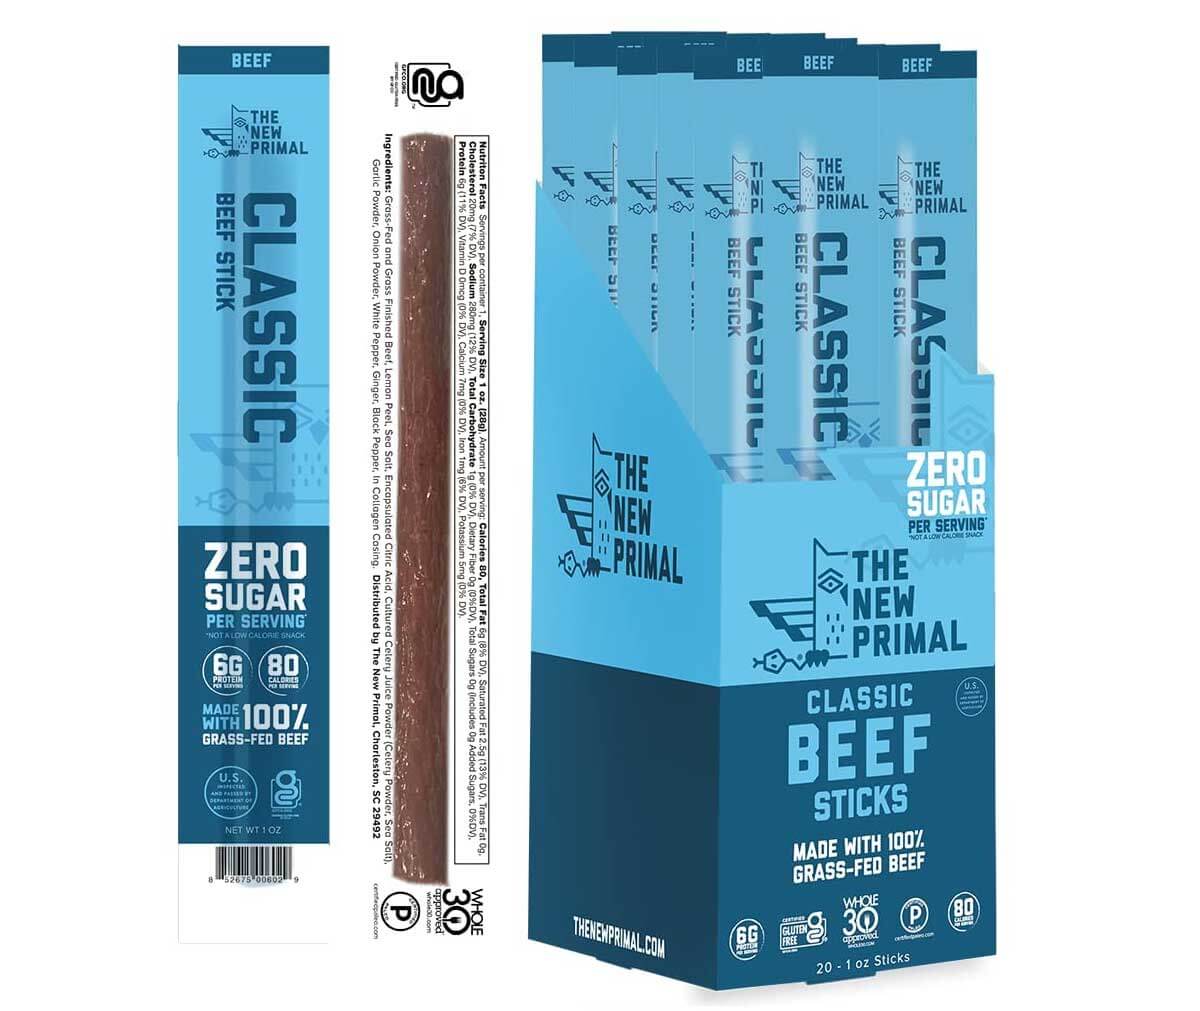 Whole30 The New Primal beef sticks.